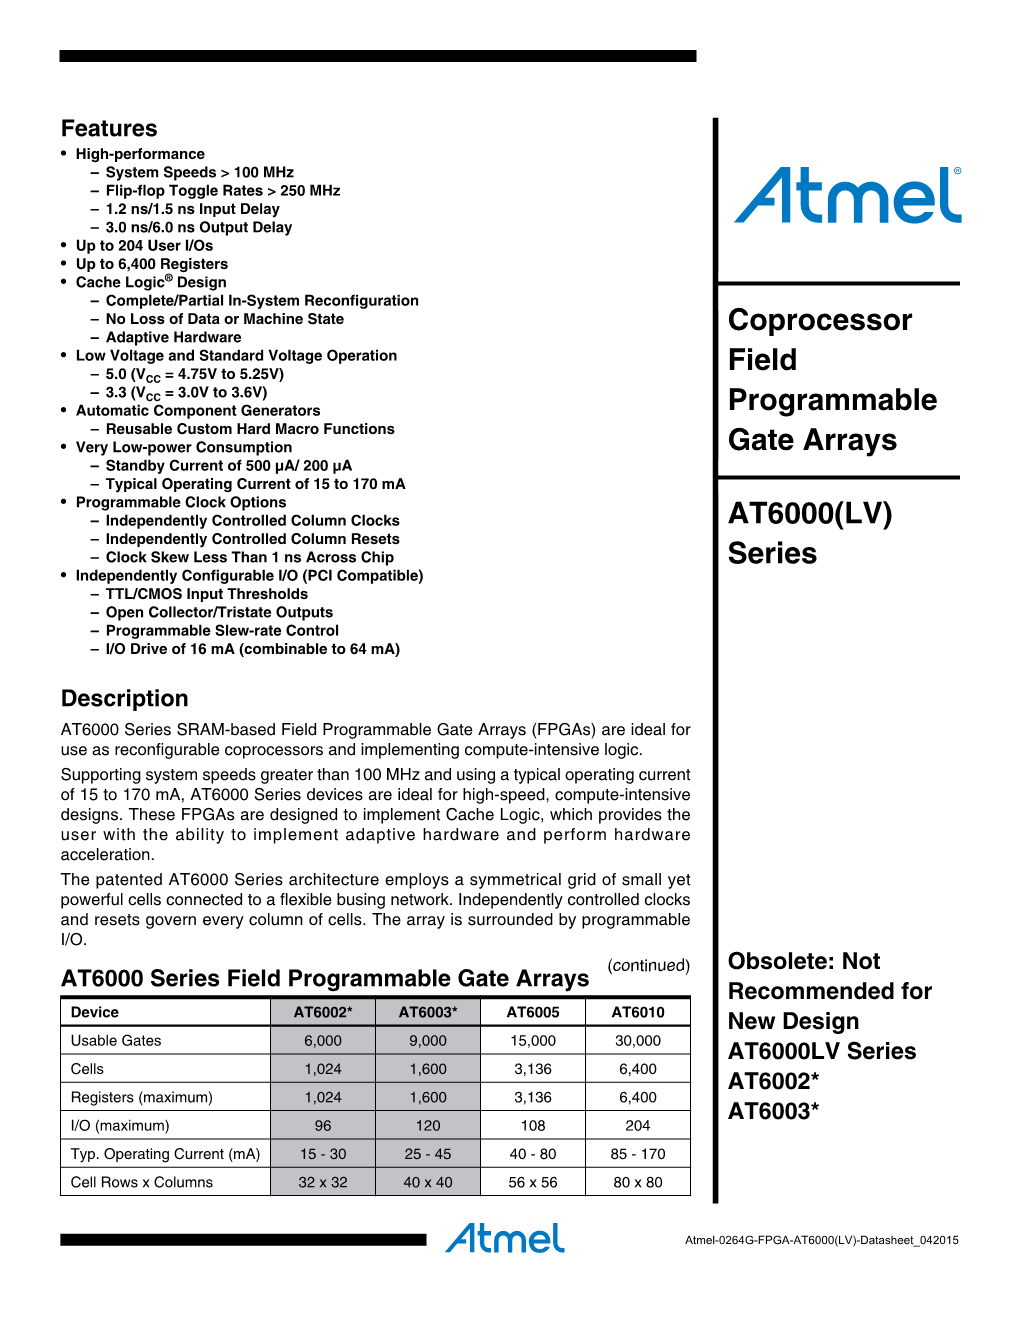 Coprocessor Field Programmable Gate Arrays AT6000(LV)